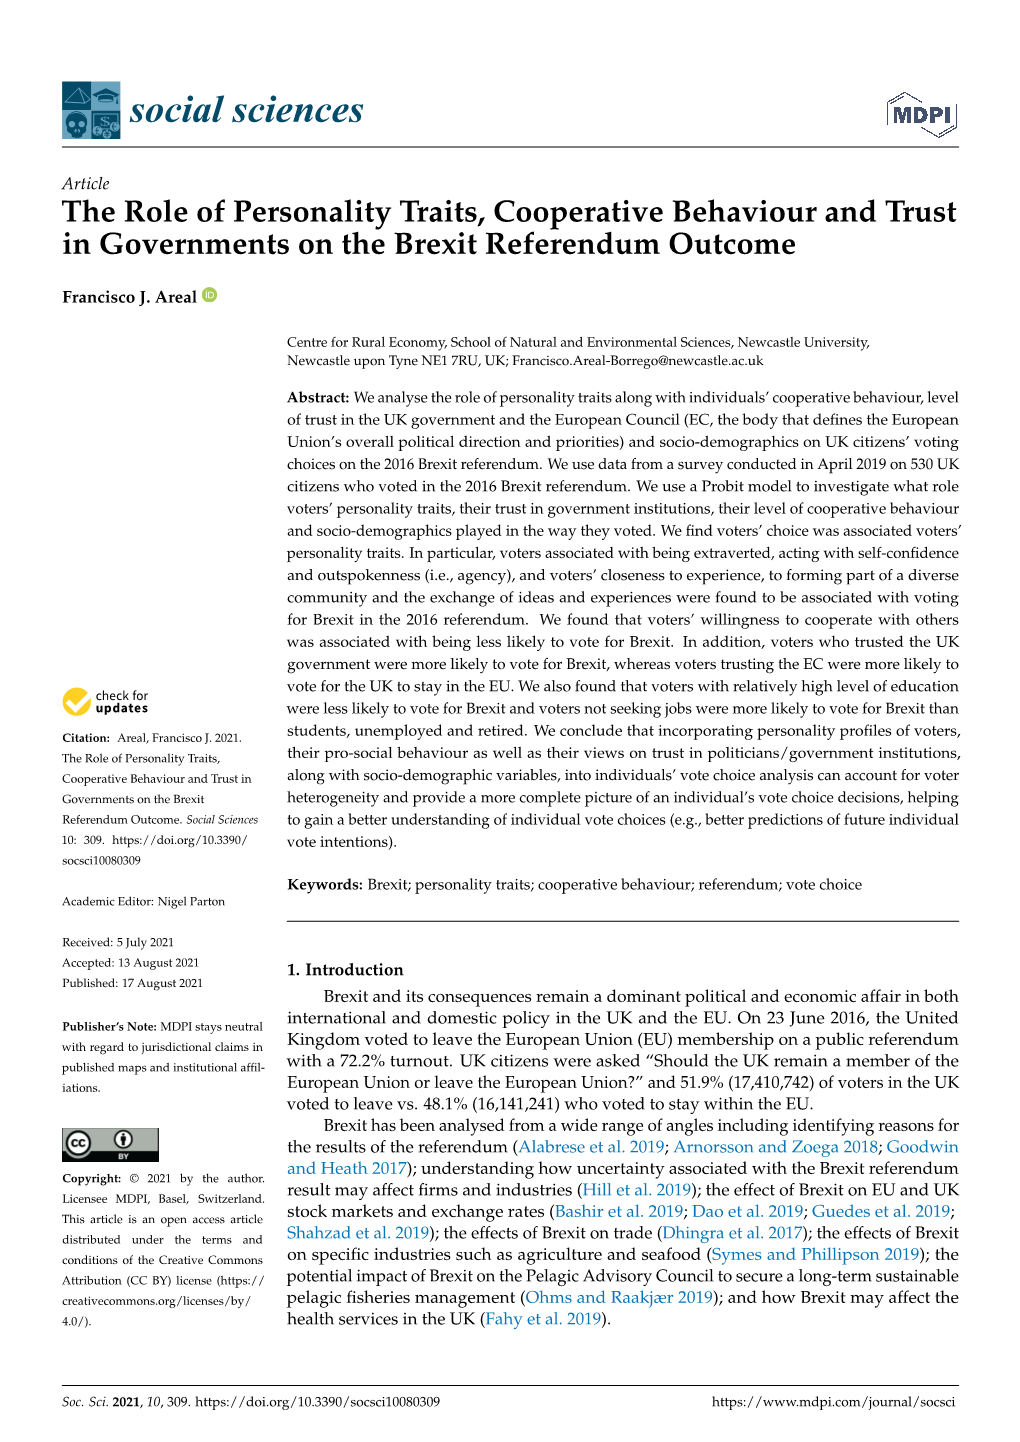 The Role of Personality Traits, Cooperative Behaviour and Trust in Governments on the Brexit Referendum Outcome